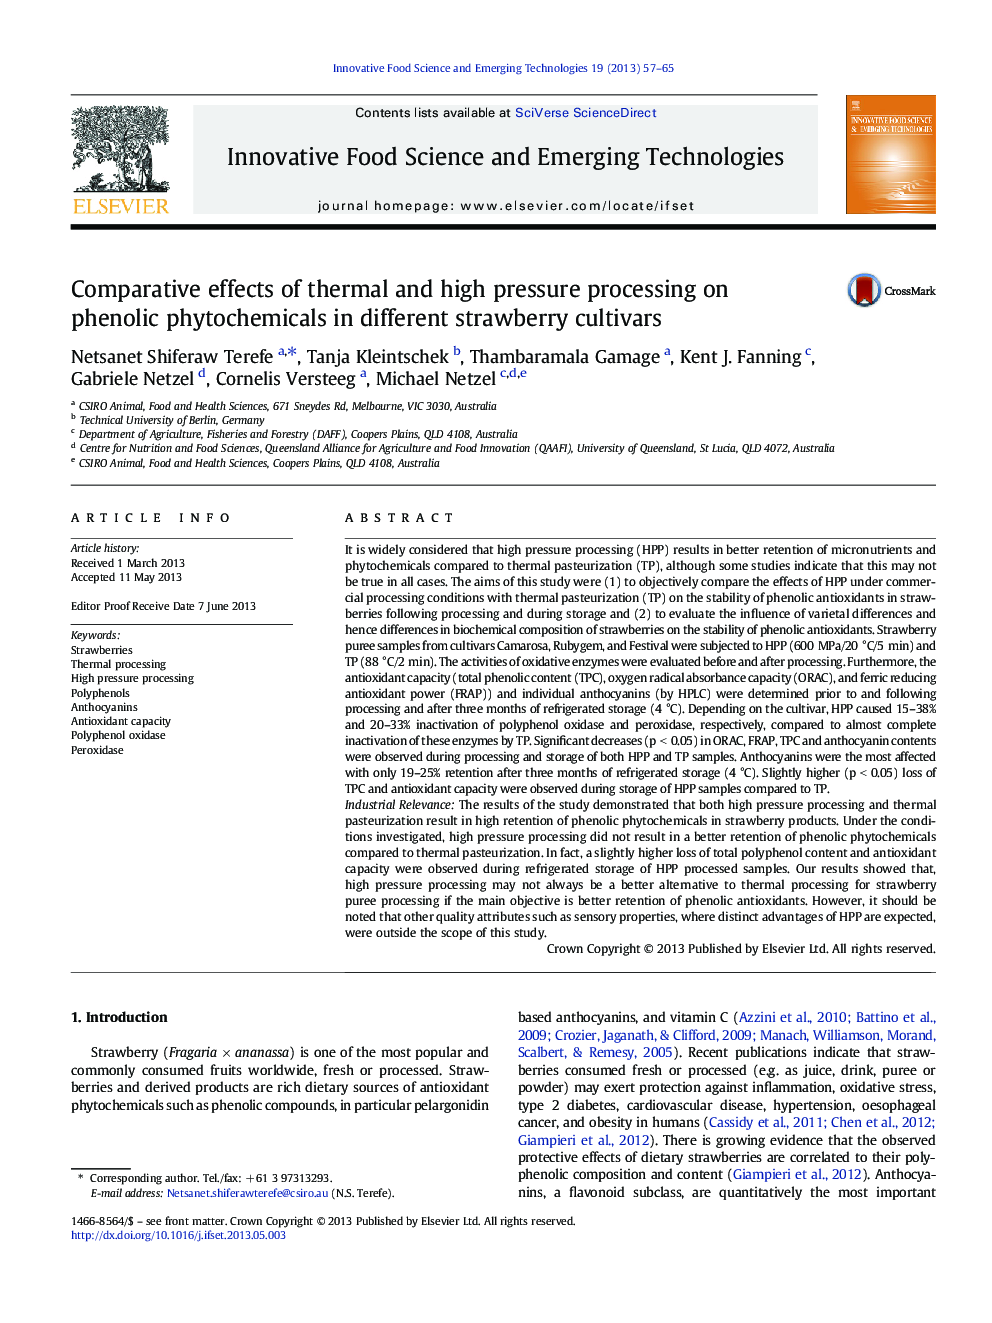 Comparative effects of thermal and high pressure processing on phenolic phytochemicals in different strawberry cultivars